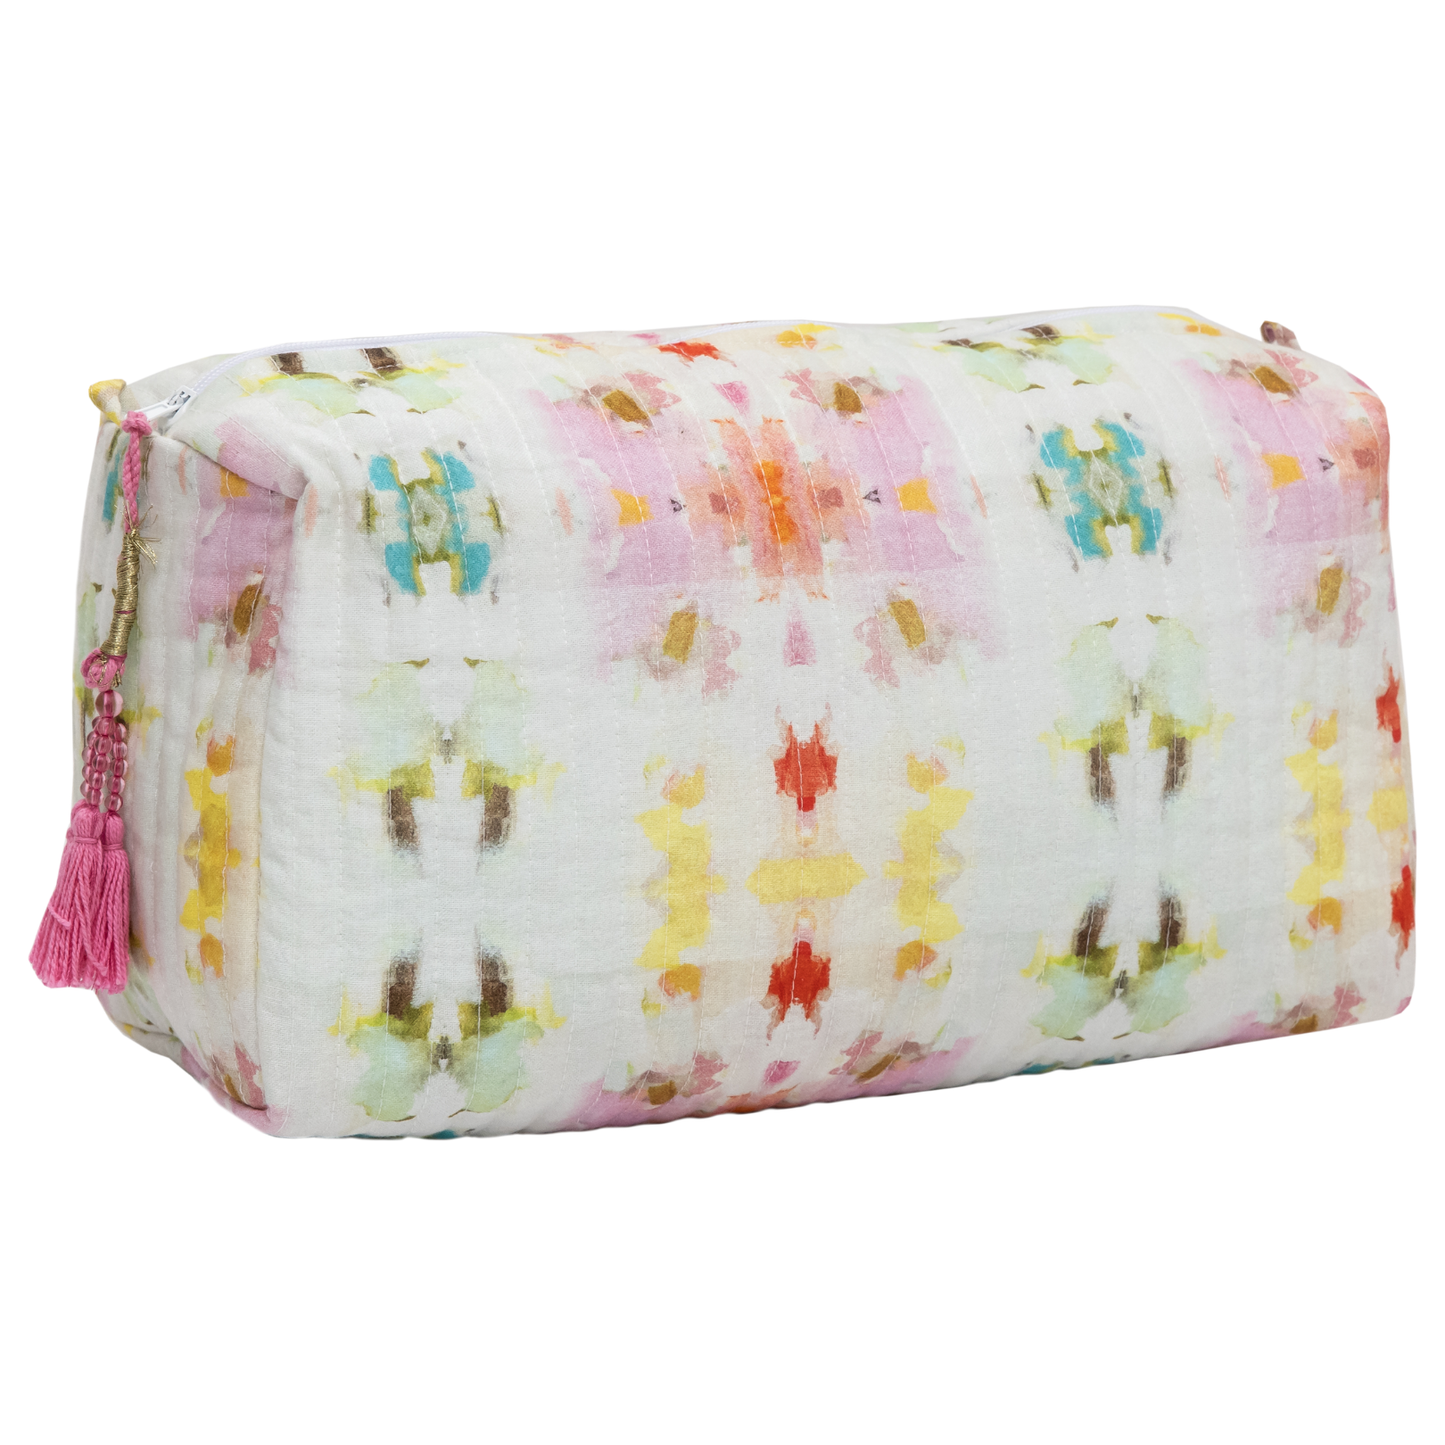 Laura Park Designs - Giverny Large Cosmetic Bag